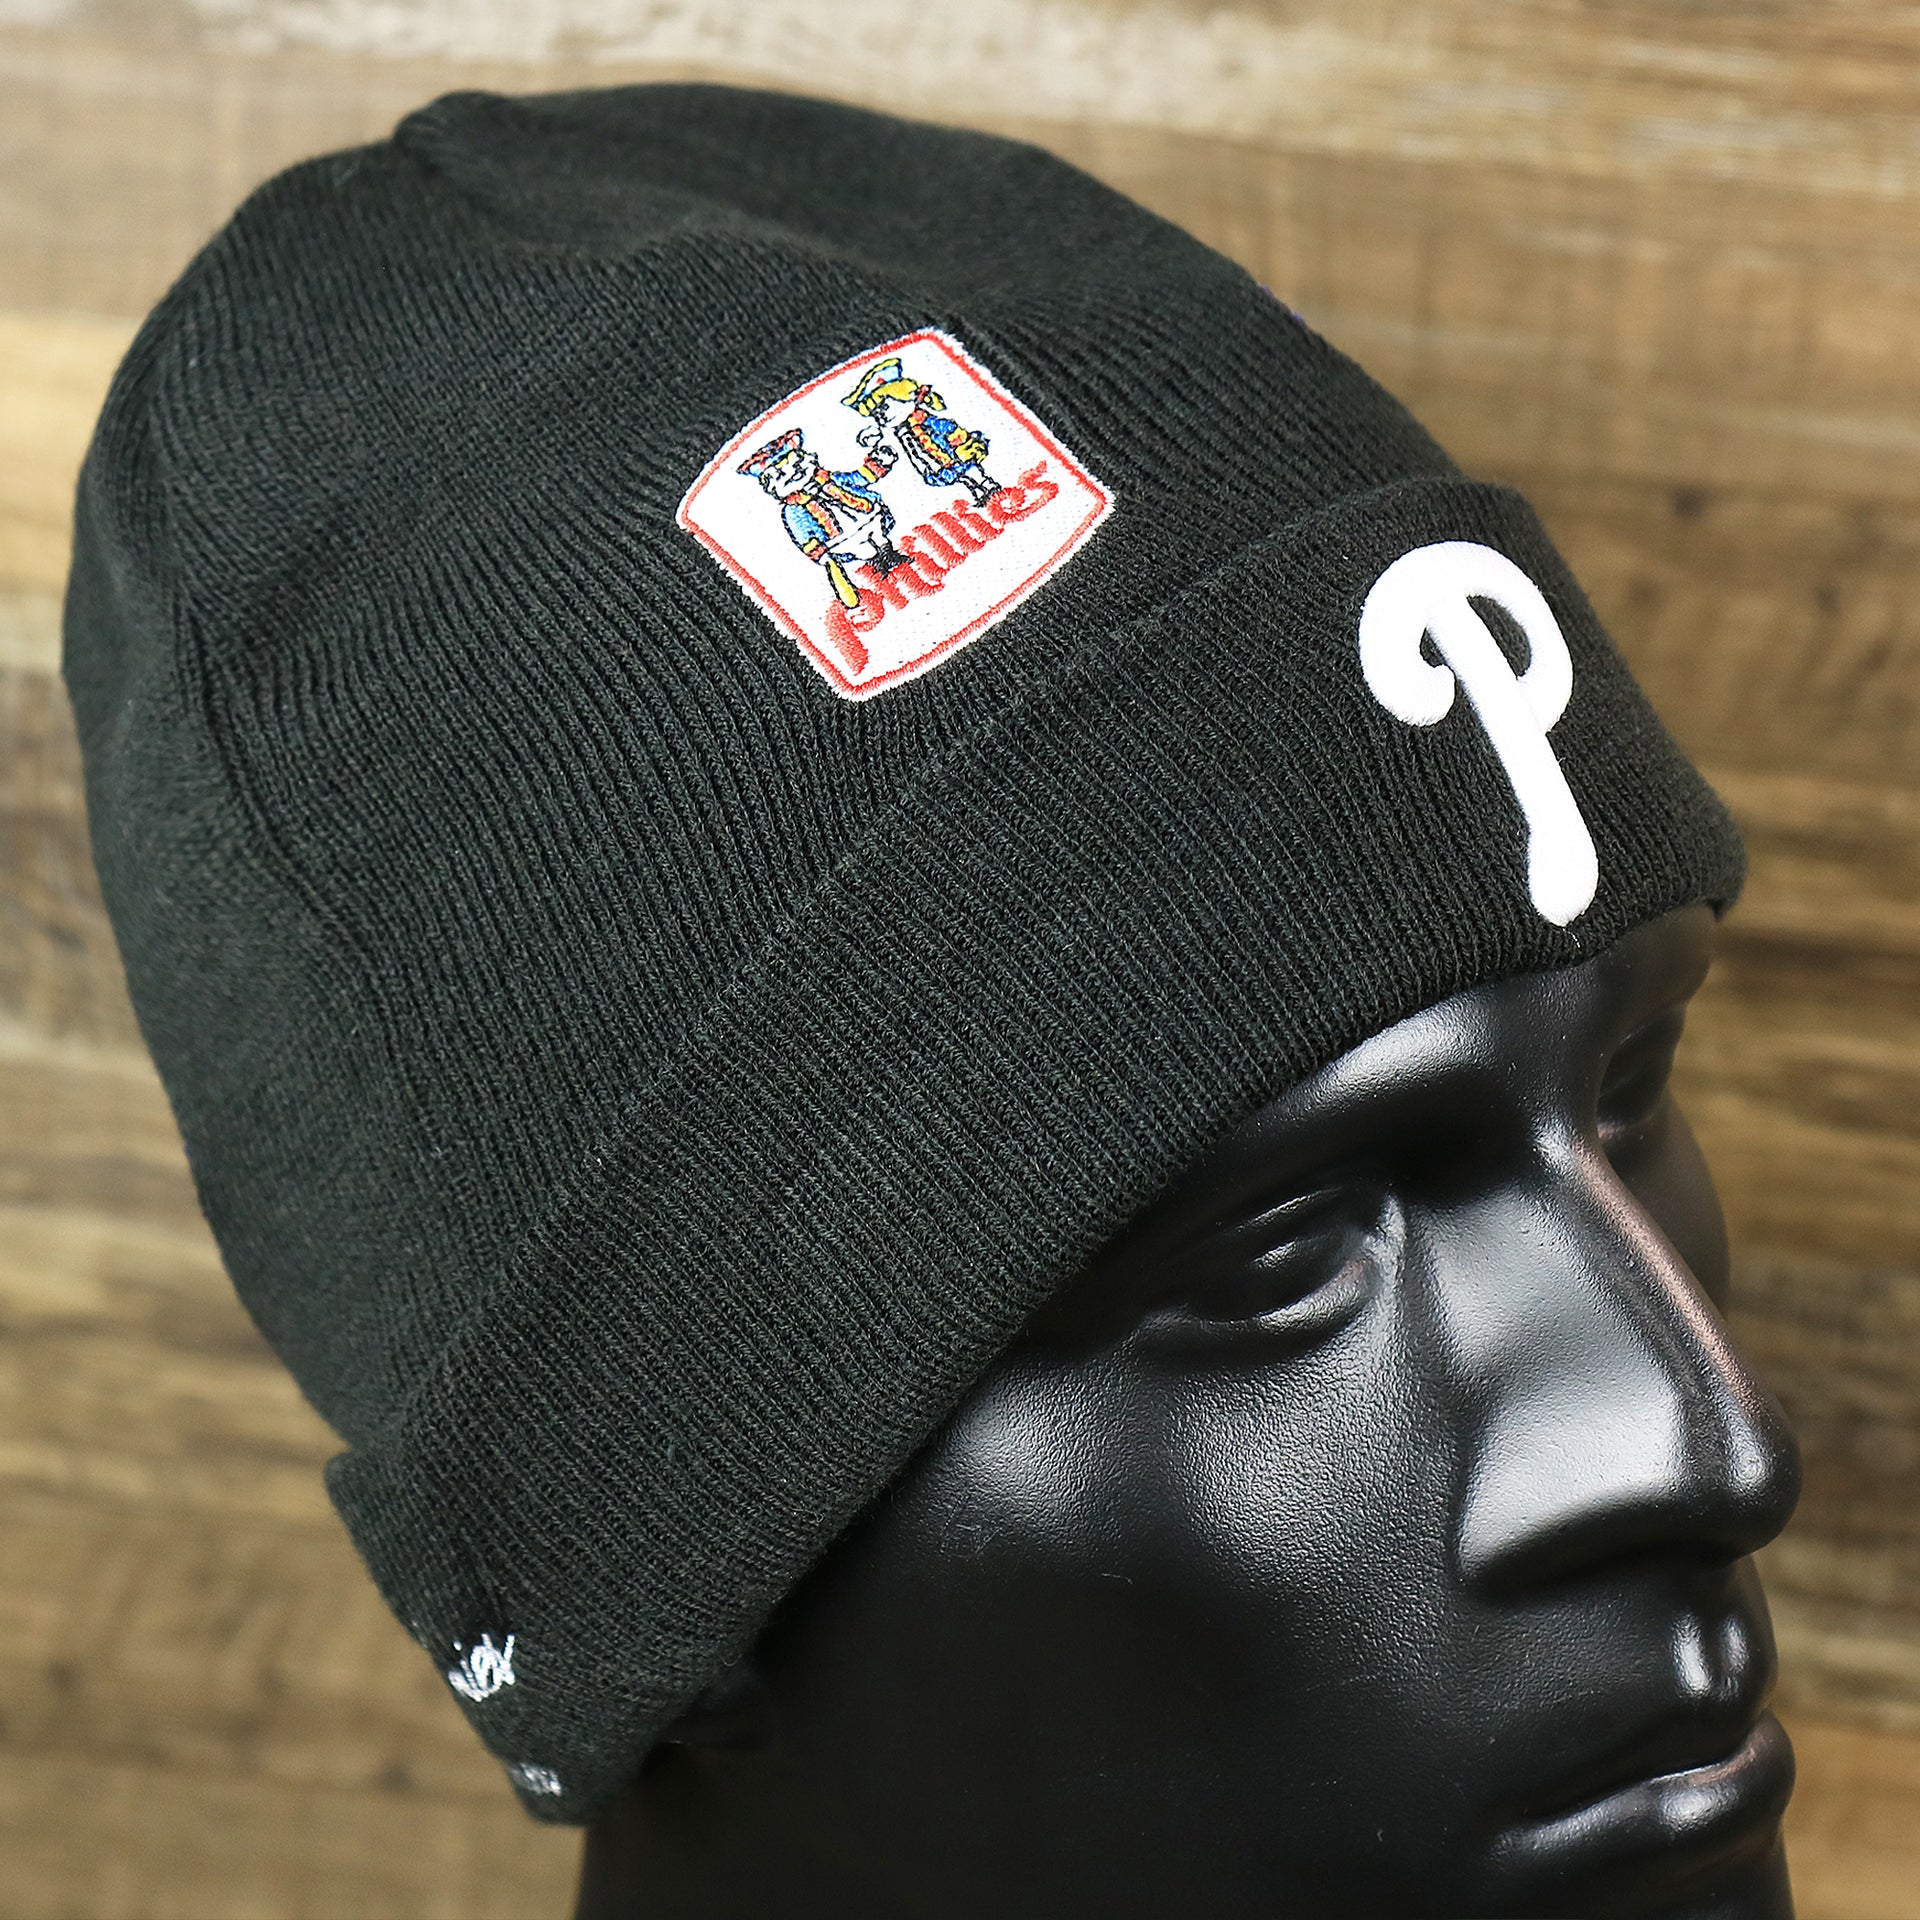 The Philadelphia Phillies All Over World Series Side Patch 2x Champion Knit Cuff Beanie | New Era, Black